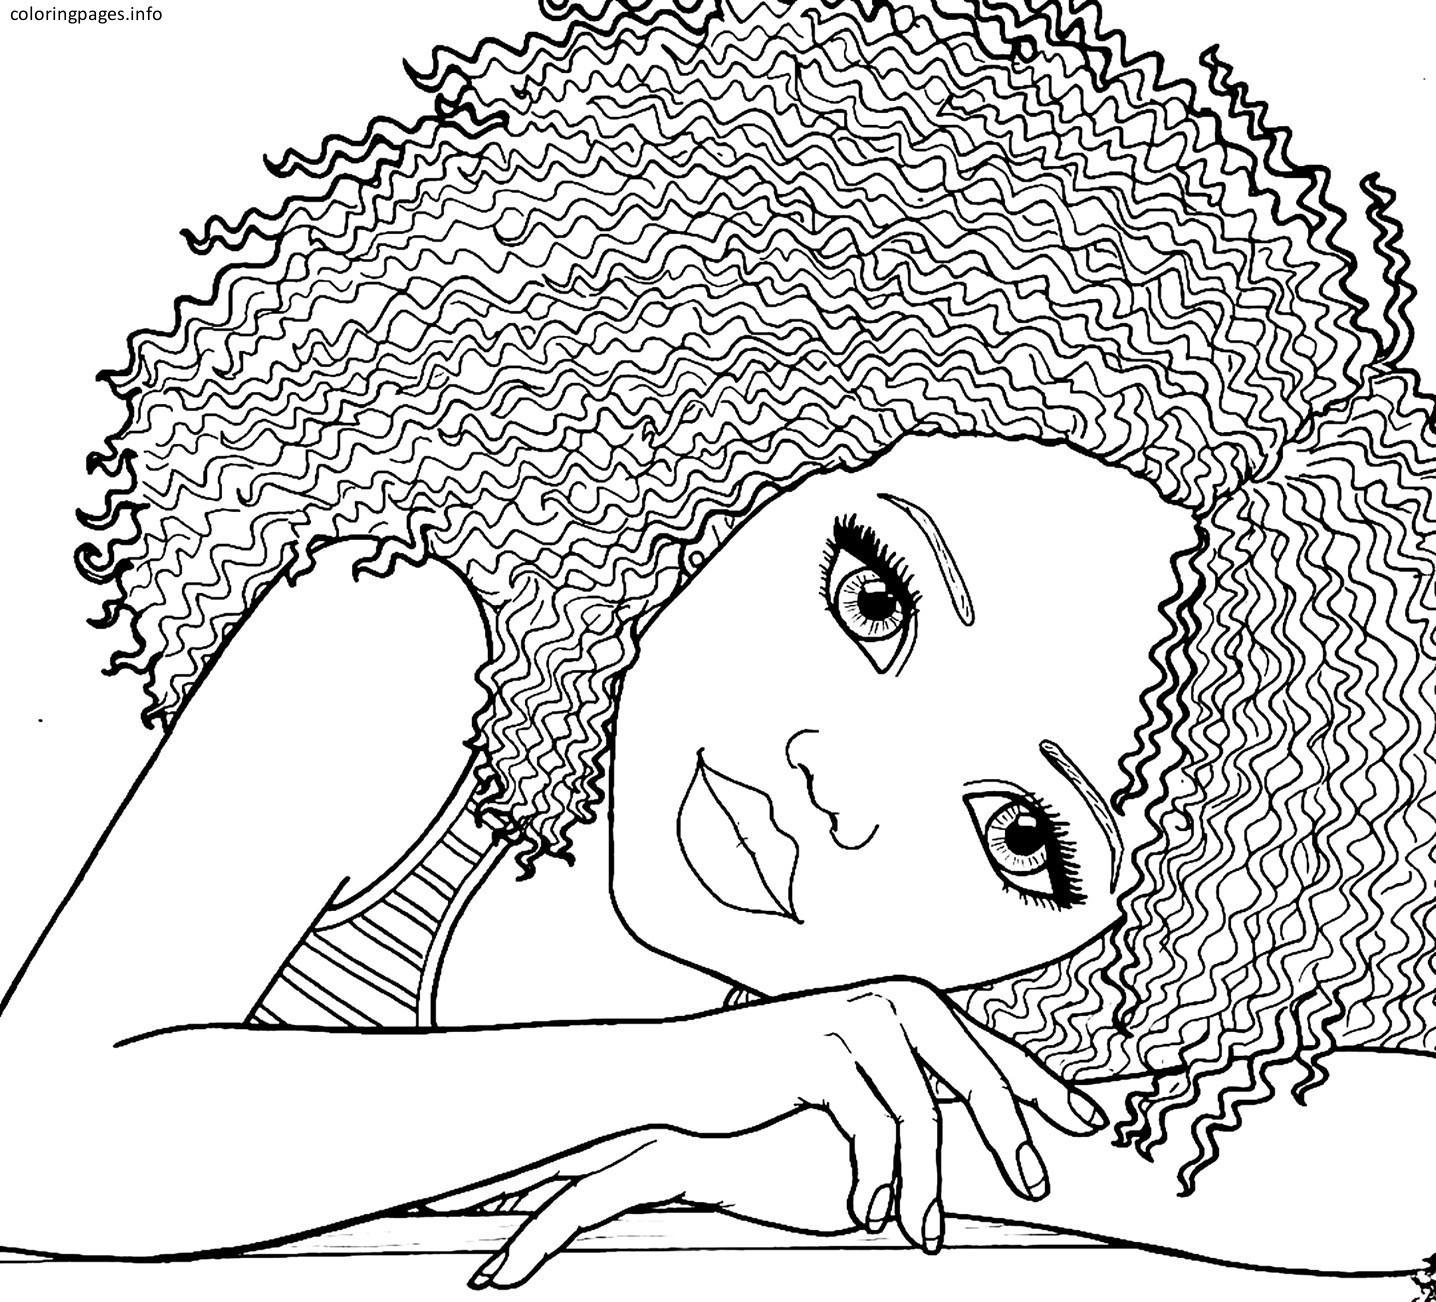 African Girl Coloring Pages at Free printable